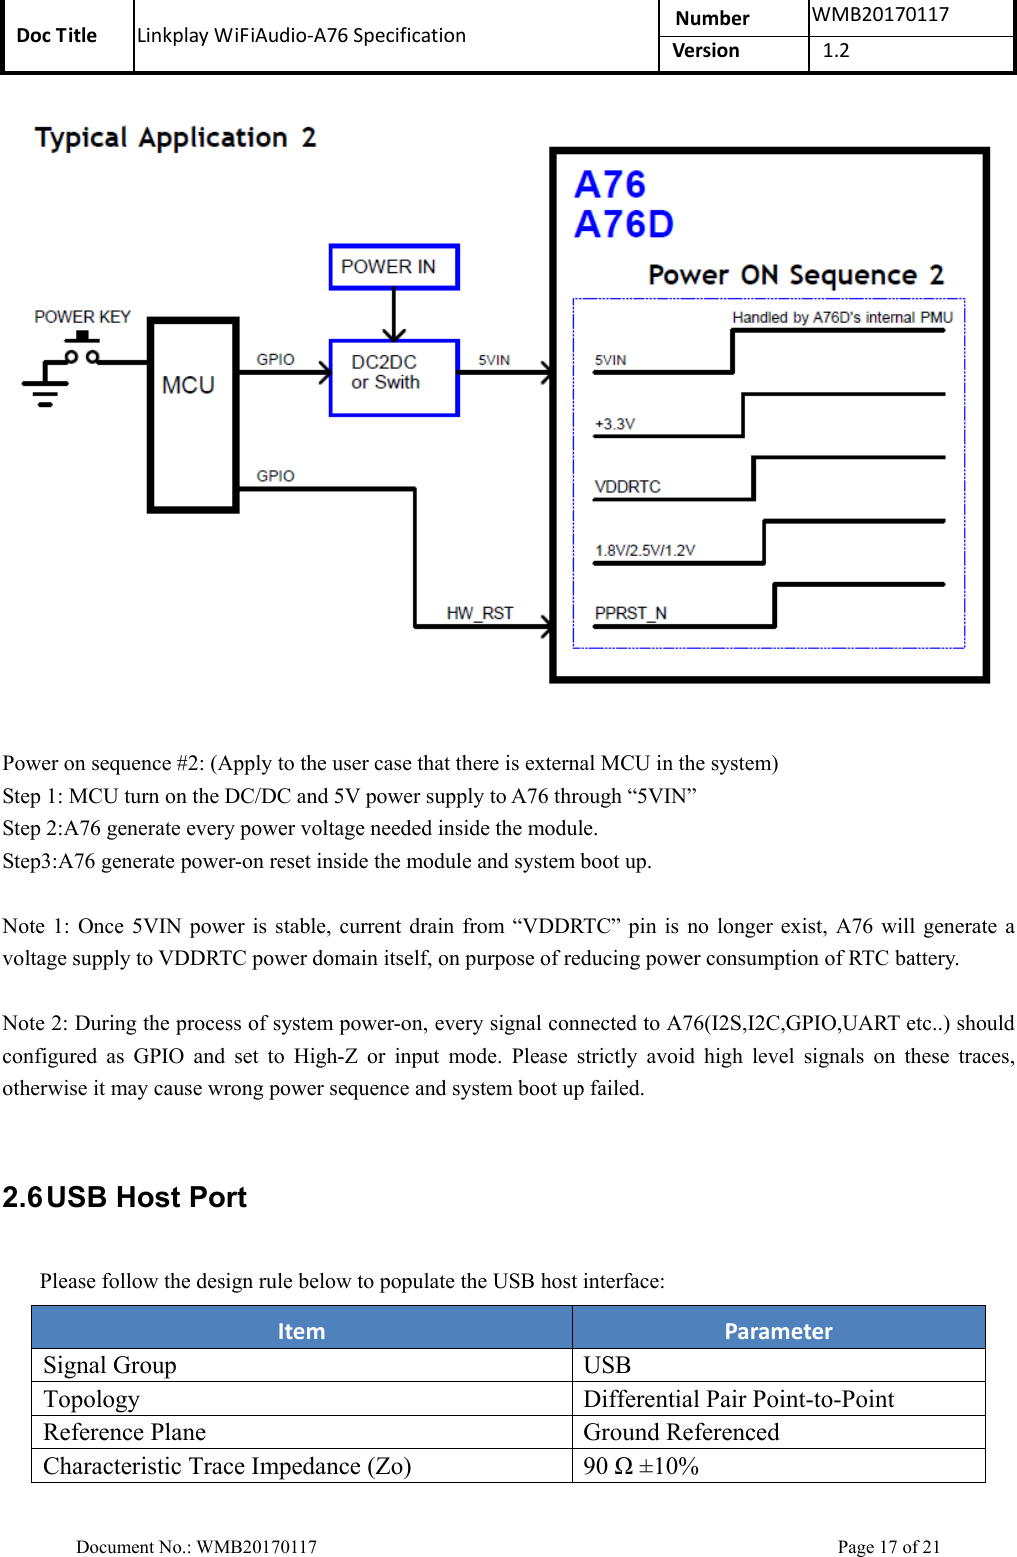 Doc Title  Linkplay WiFiAudio-A76 Specification  Number  WMB20170117Version  1.2  Document No.: WMB20170117    Page 17 of 21   Power on sequence #2: (Apply to the user case that there is external MCU in the system)   Step 1: MCU turn on the DC/DC and 5V power supply to A76 through “5VIN” Step 2:A76 generate every power voltage needed inside the module. Step3:A76 generate power-on reset inside the module and system boot up.  Note 1:  Once  5VIN power is  stable,  current  drain  from  “VDDRTC”  pin  is  no longer exist, A76 will generate a voltage supply to VDDRTC power domain itself, on purpose of reducing power consumption of RTC battery.  Note 2: During the process of system power-on, every signal connected to A76(I2S,I2C,GPIO,UART etc..) should configured  as  GPIO  and  set  to  High-Z  or  input  mode.  Please  strictly  avoid  high  level  signals  on  these  traces, otherwise it may cause wrong power sequence and system boot up failed.  2.6 USB Host Port Please follow the design rule below to populate the USB host interface: Item  Parameter Signal Group USB Topology  Differential Pair Point-to-Point Reference Plane  Ground Referenced Characteristic Trace Impedance (Zo)  90 Ω ±10% 